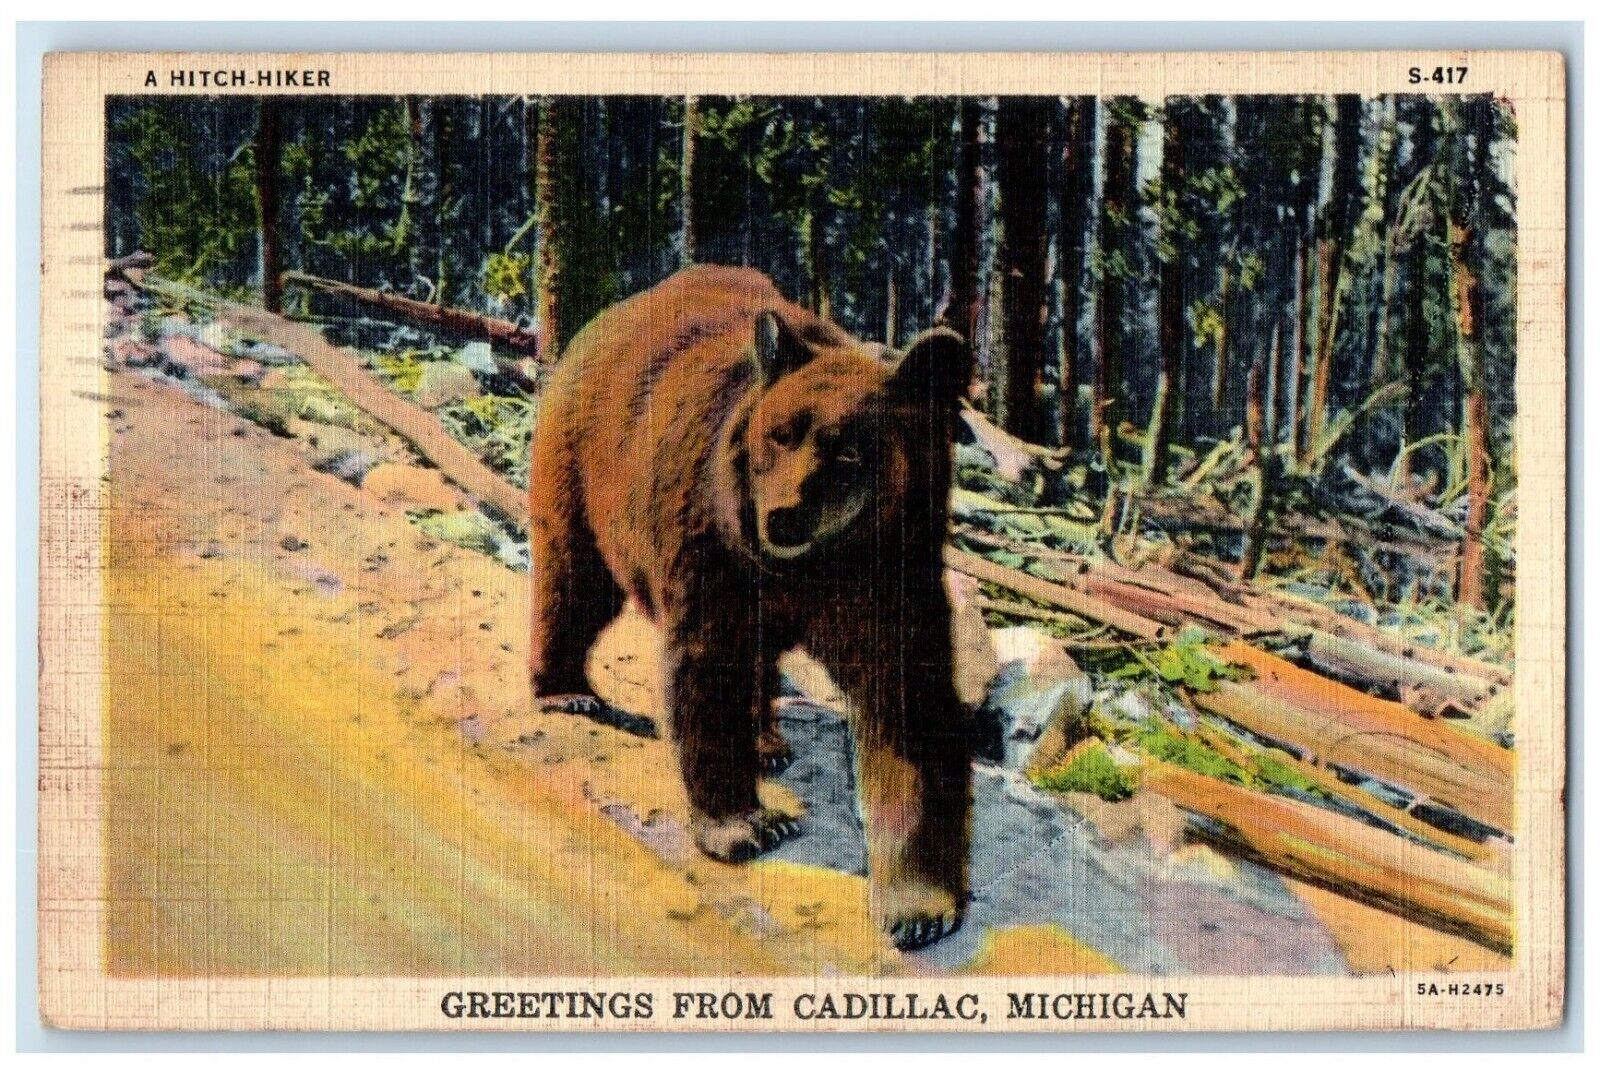 1944 Brown Bear Animal Forest Greetings From Cadillac Michigan Vintage Postcard